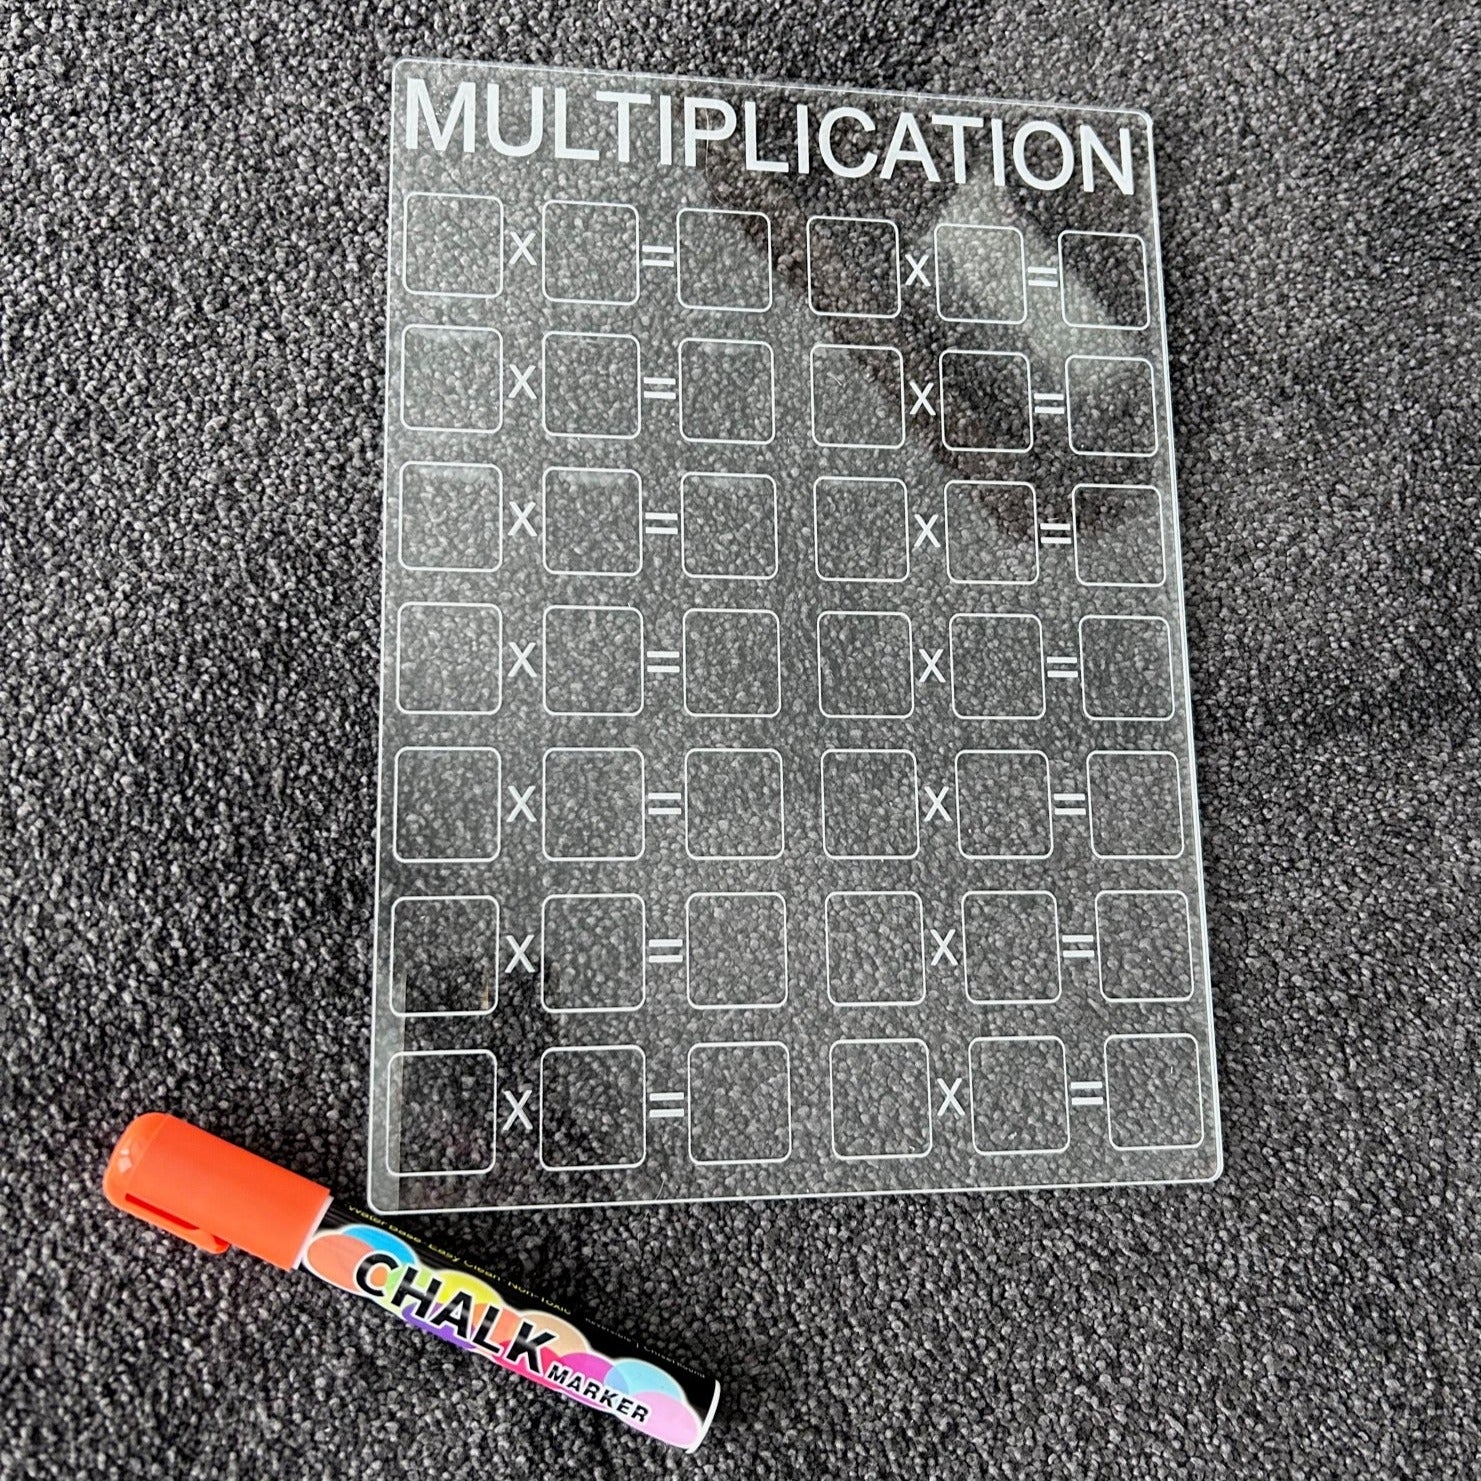 Multiplication Maths Equation Board with Chalk Marker